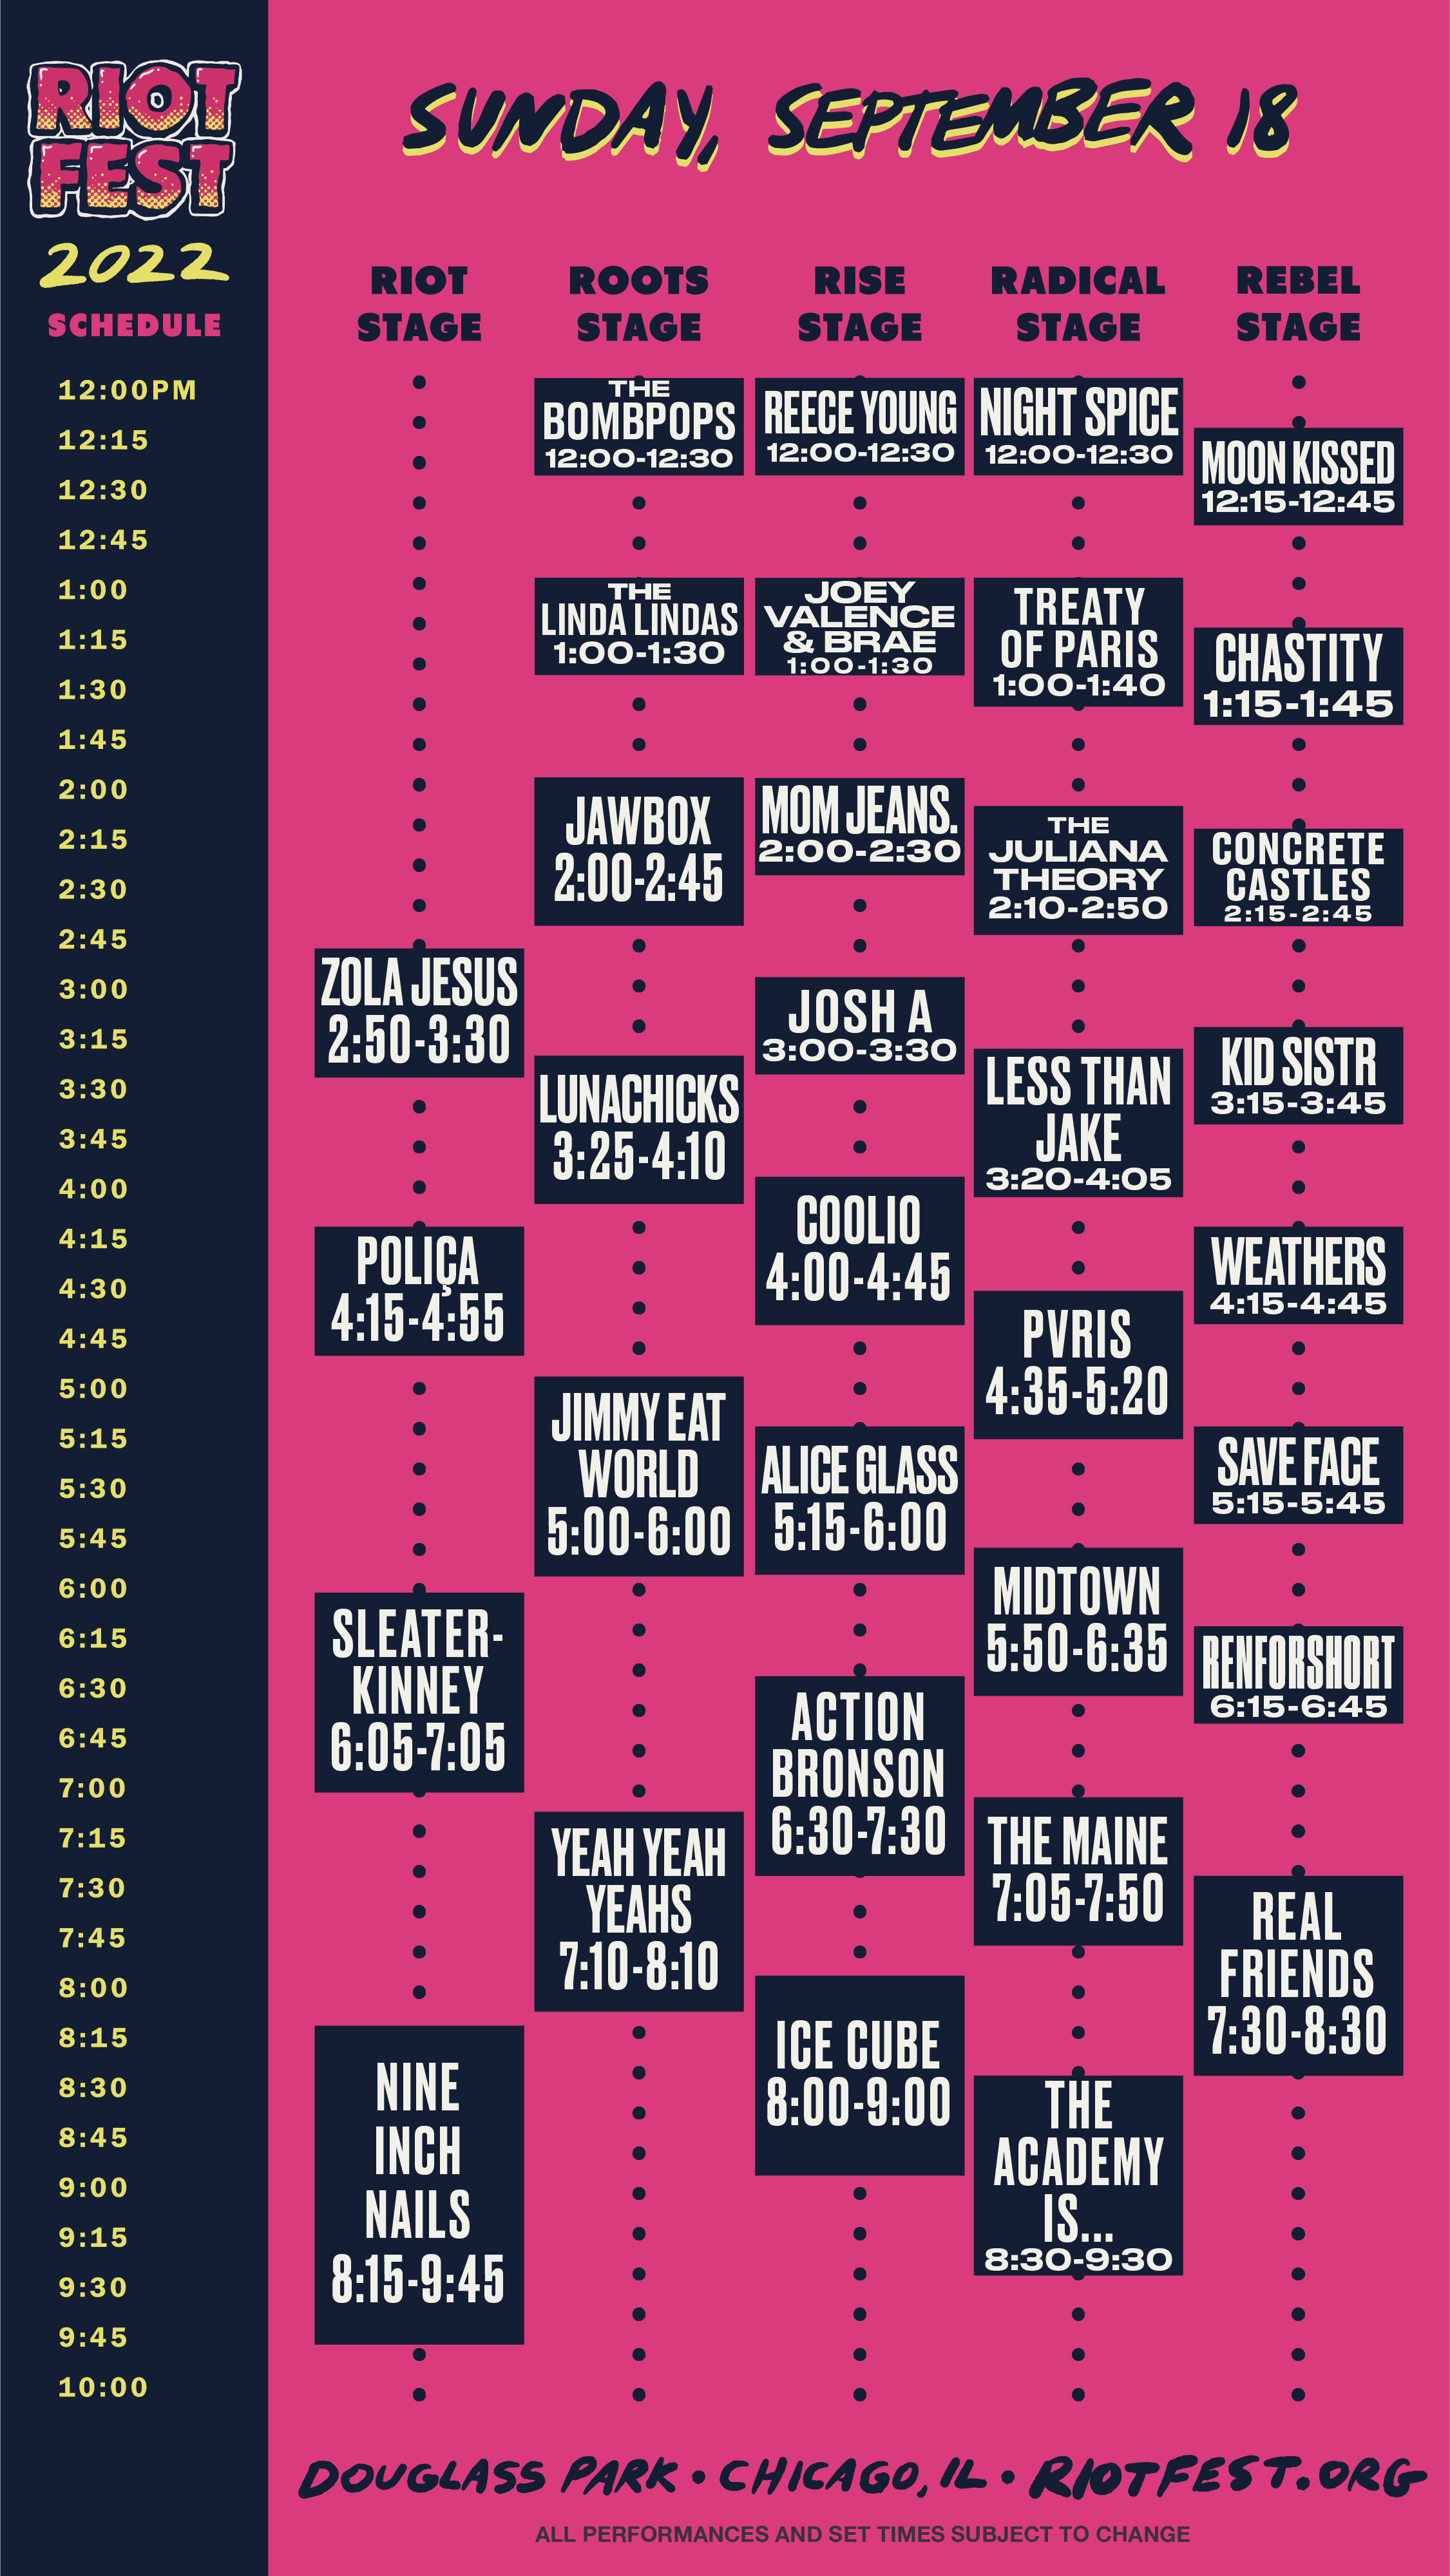 Riot Fest 2022 Sunday Schedule - September 18th